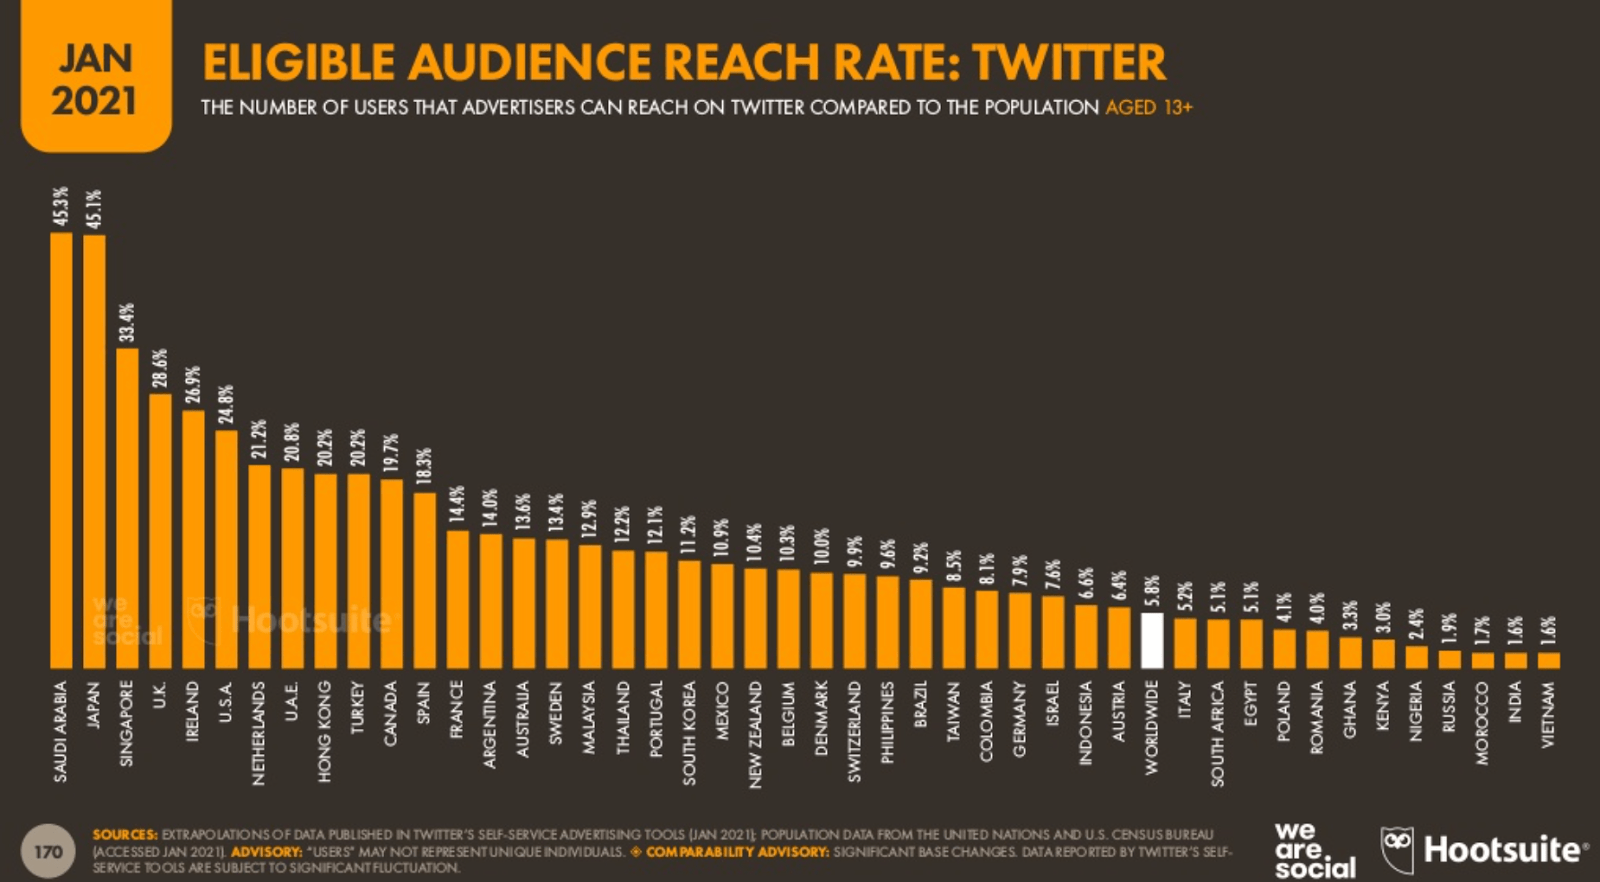 Eligible audience reach rate